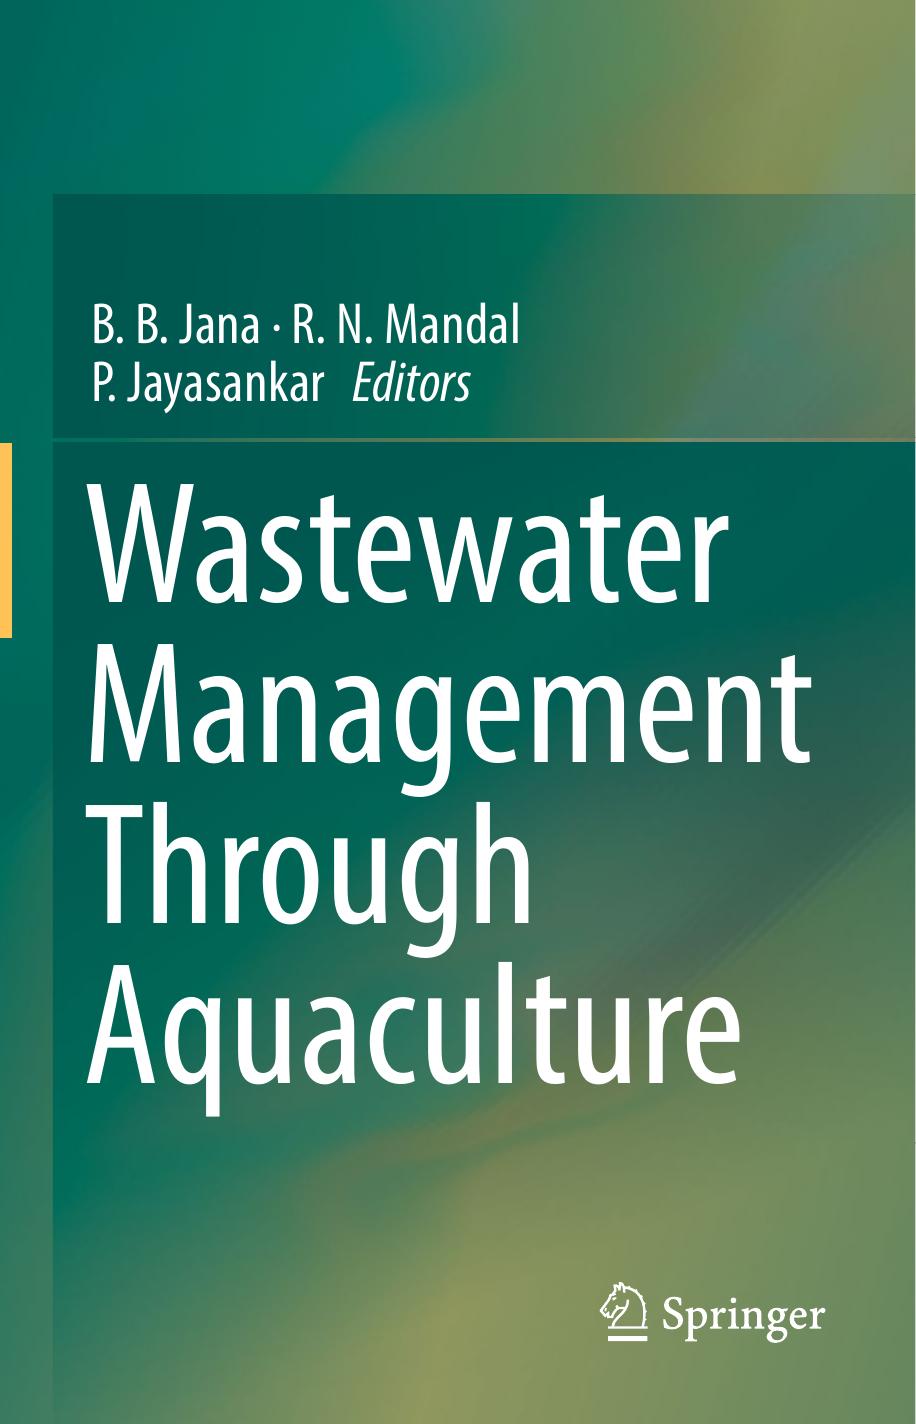 Wastewater Management Through Aquaculture ( PDFDrive ), 2018